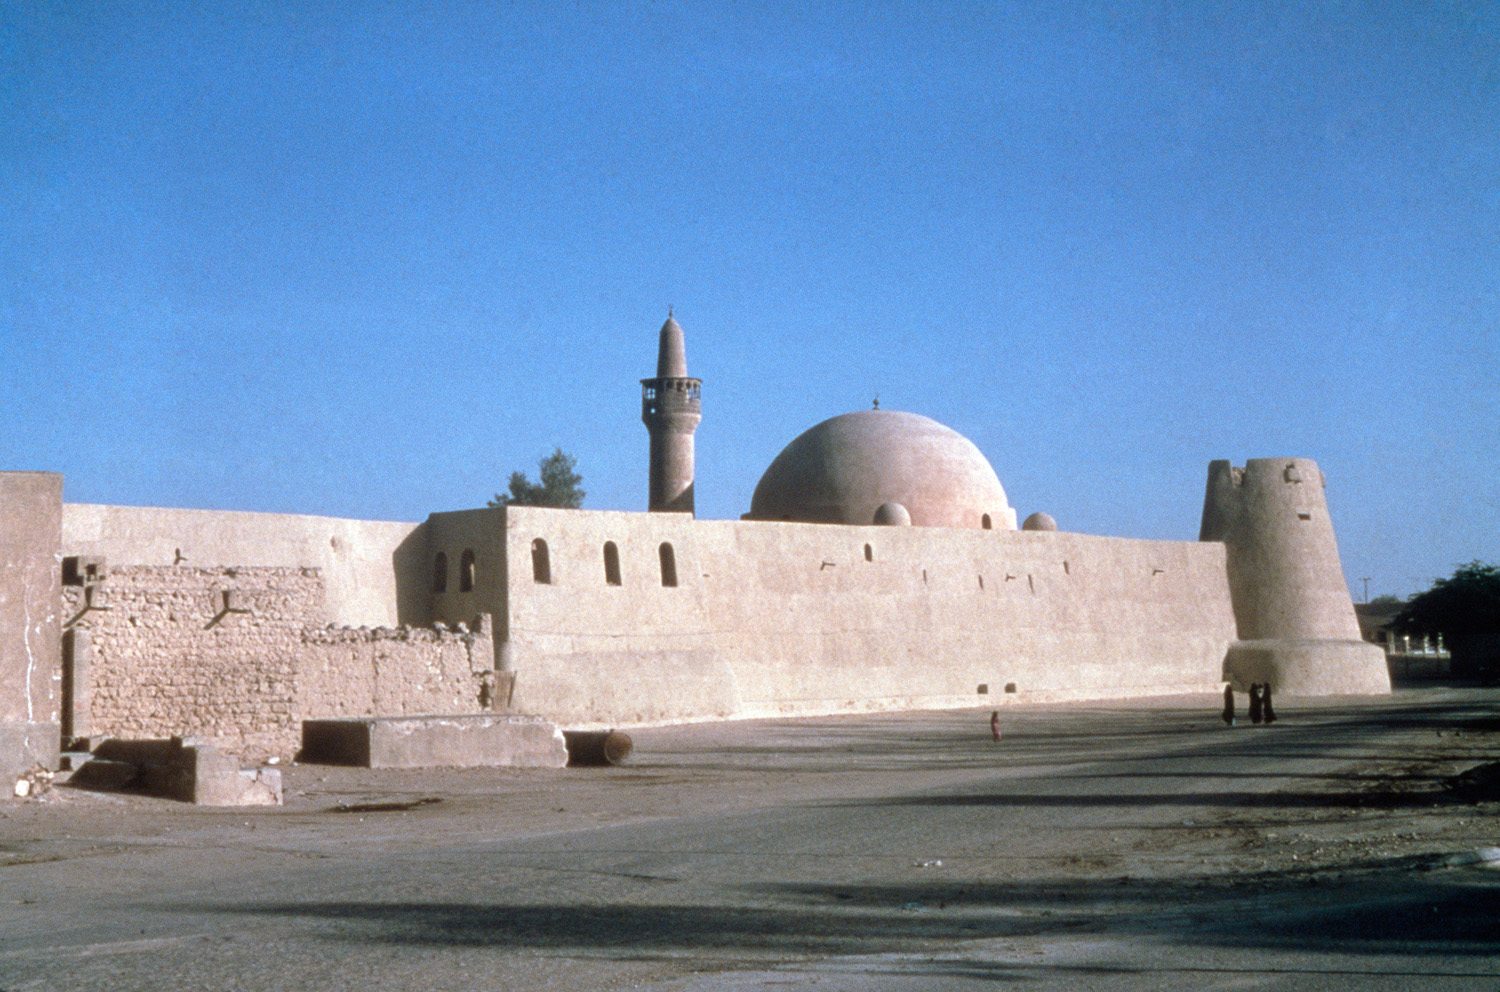 View of mosque inside fortress walls; dome and minaret visible